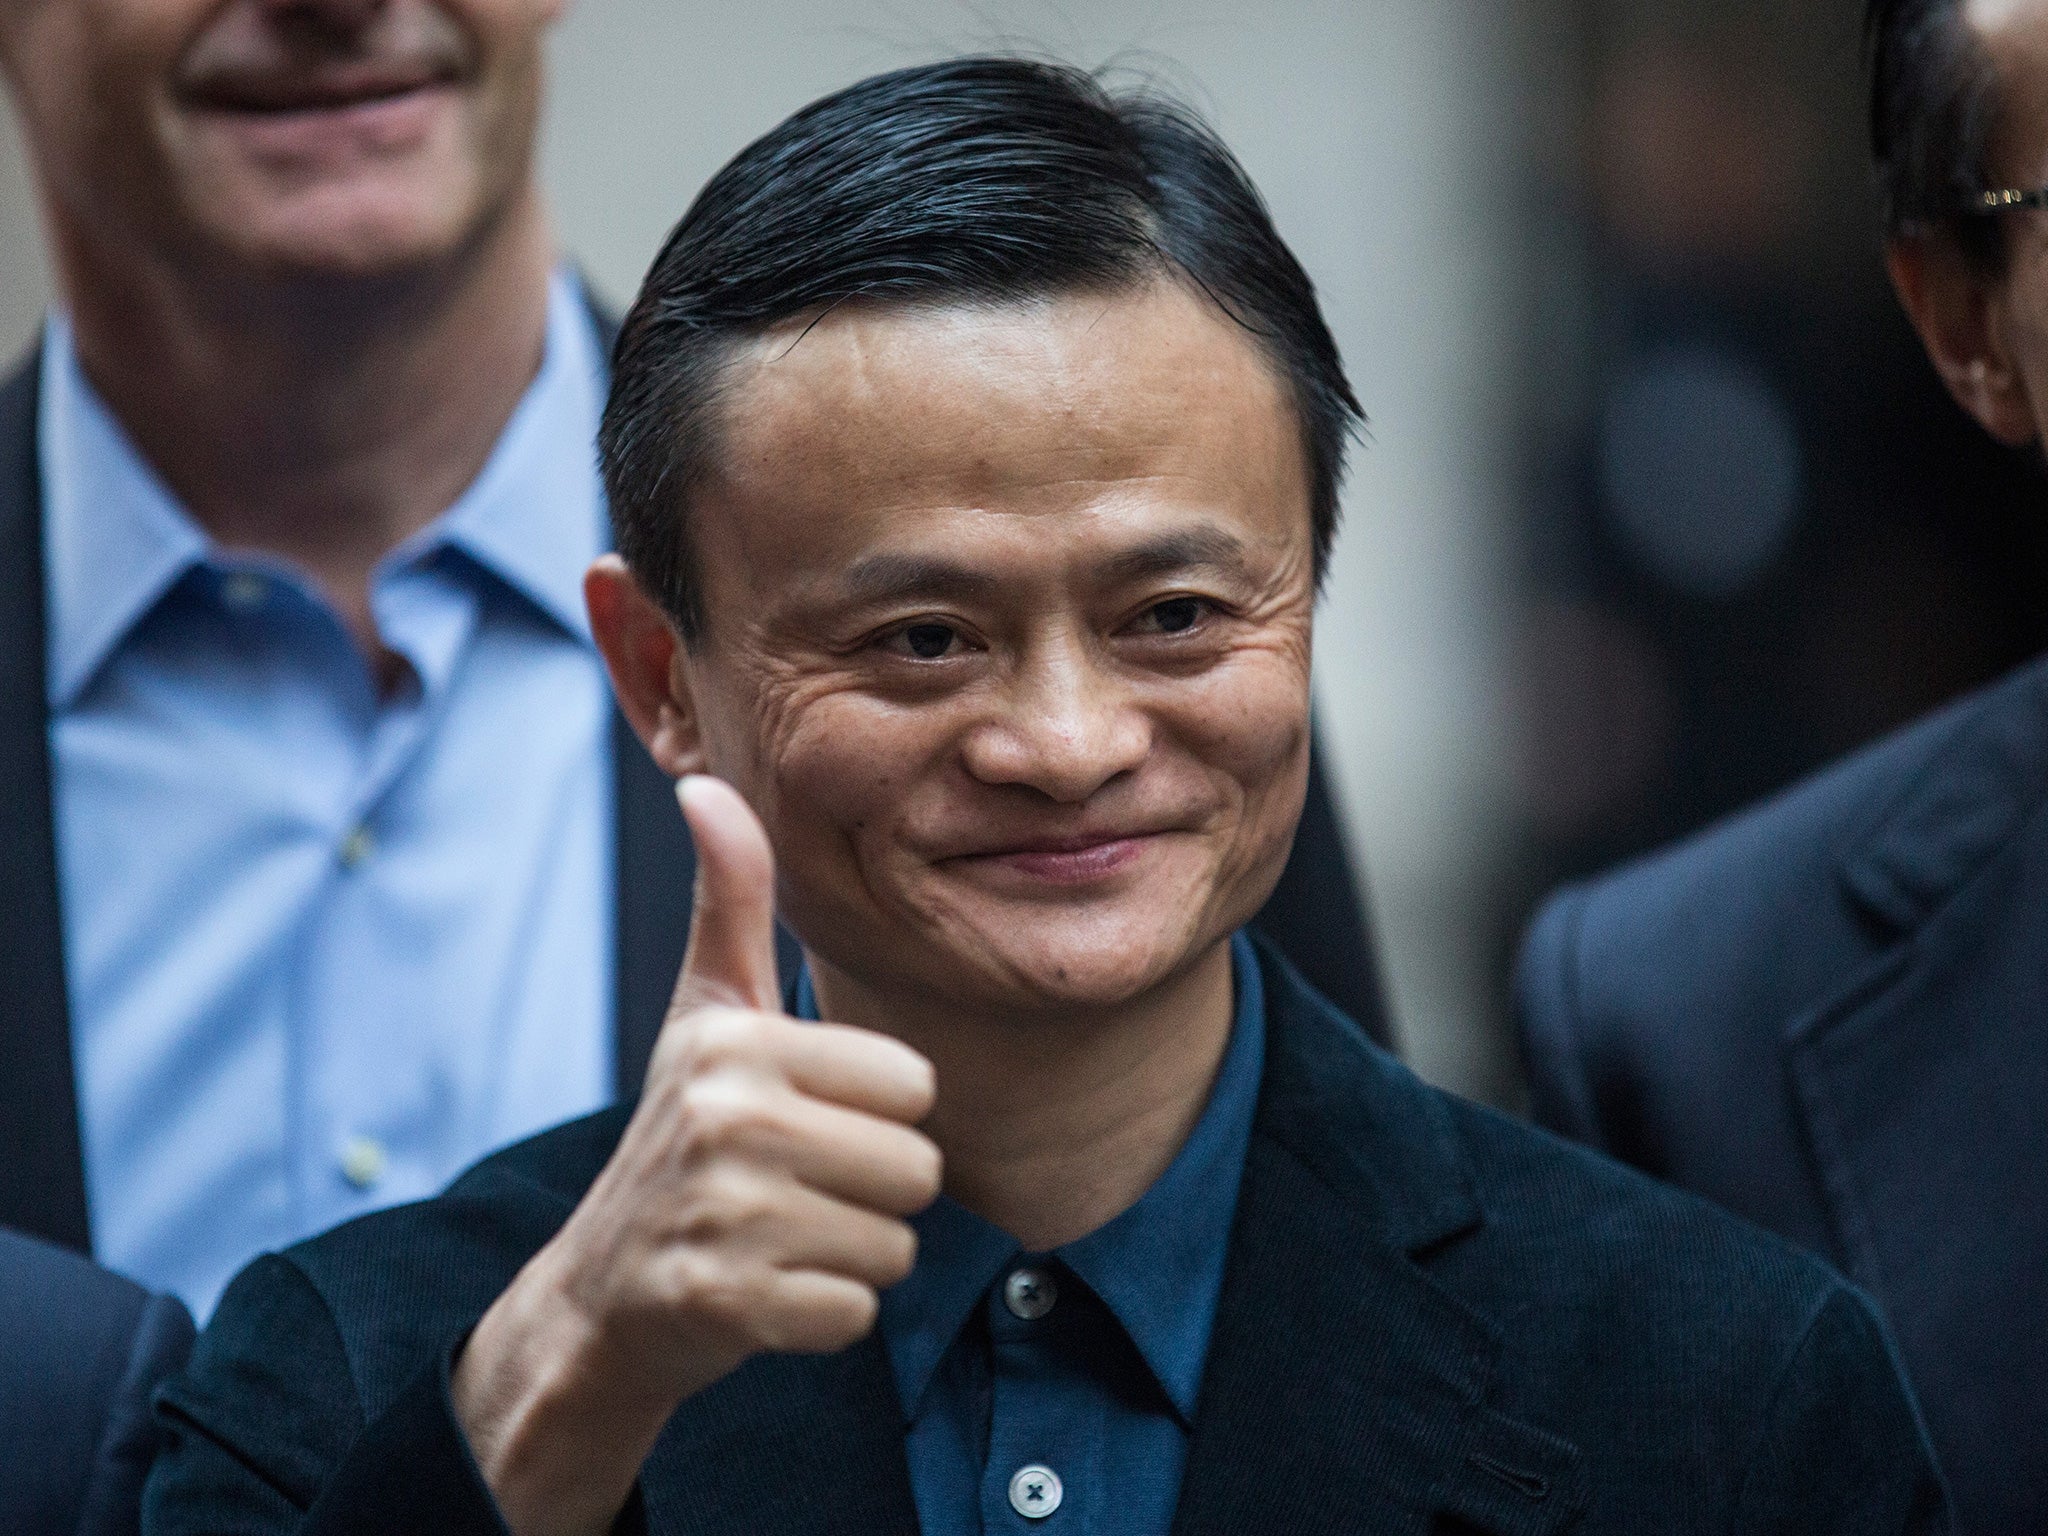 Jack Ma's comments came as Alibaba provided its first financial forecast since going public in 2014